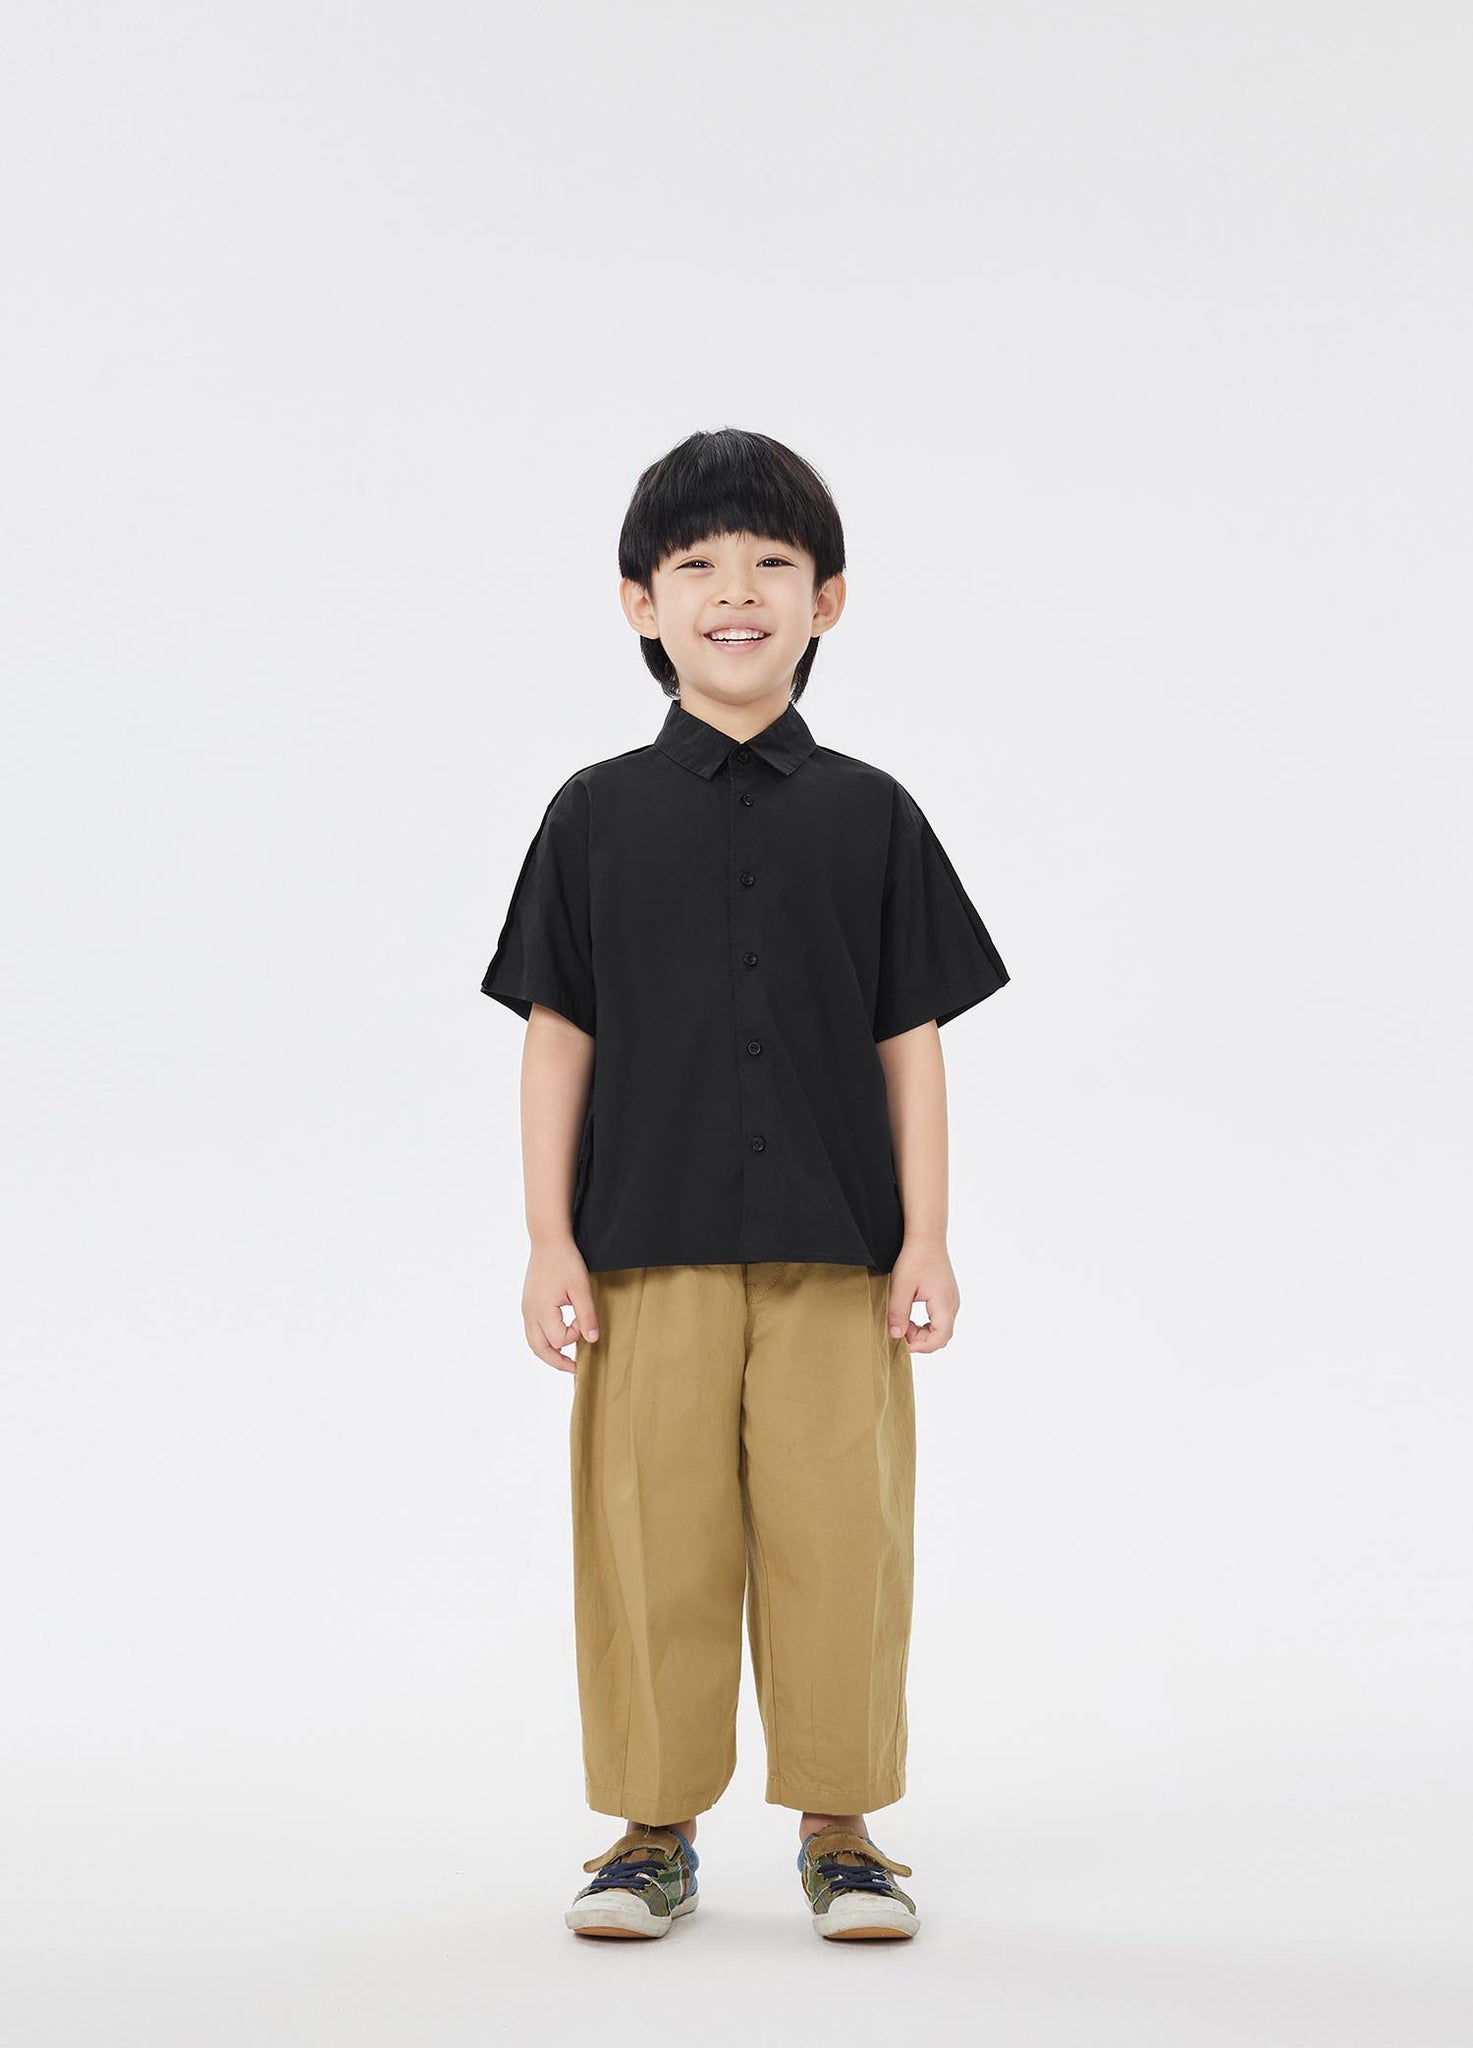 Pants / jnby by JNBY Solid Cropped Pants